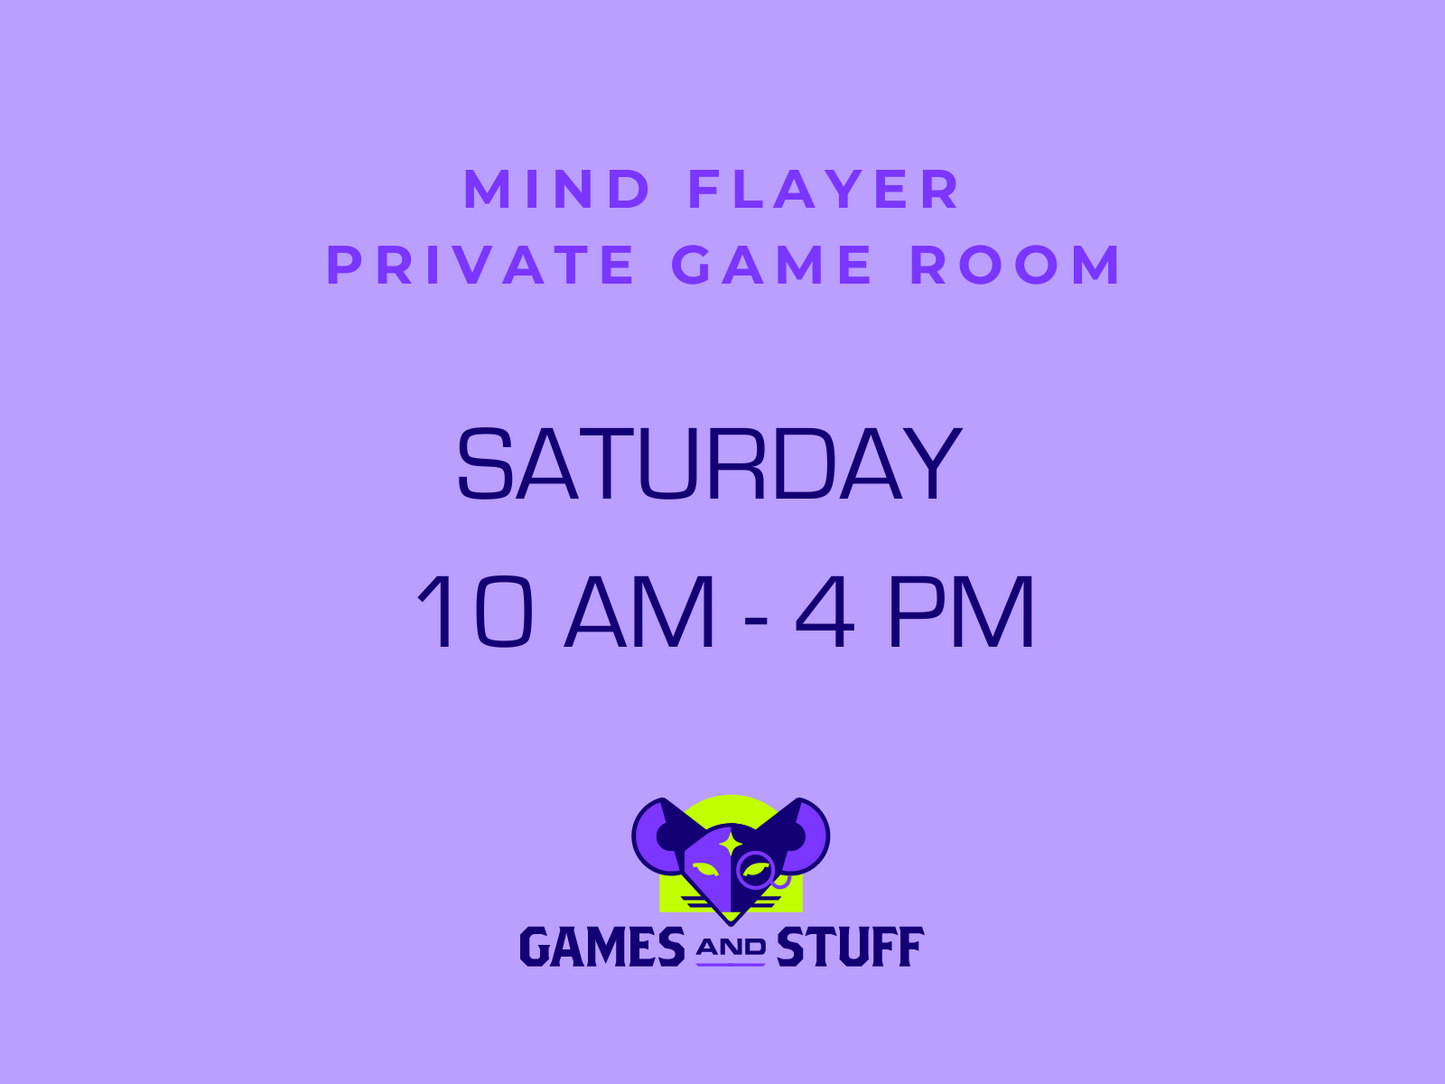 MIND FLAYER PRIVATE GAME ROOM - SATURDAY DAY